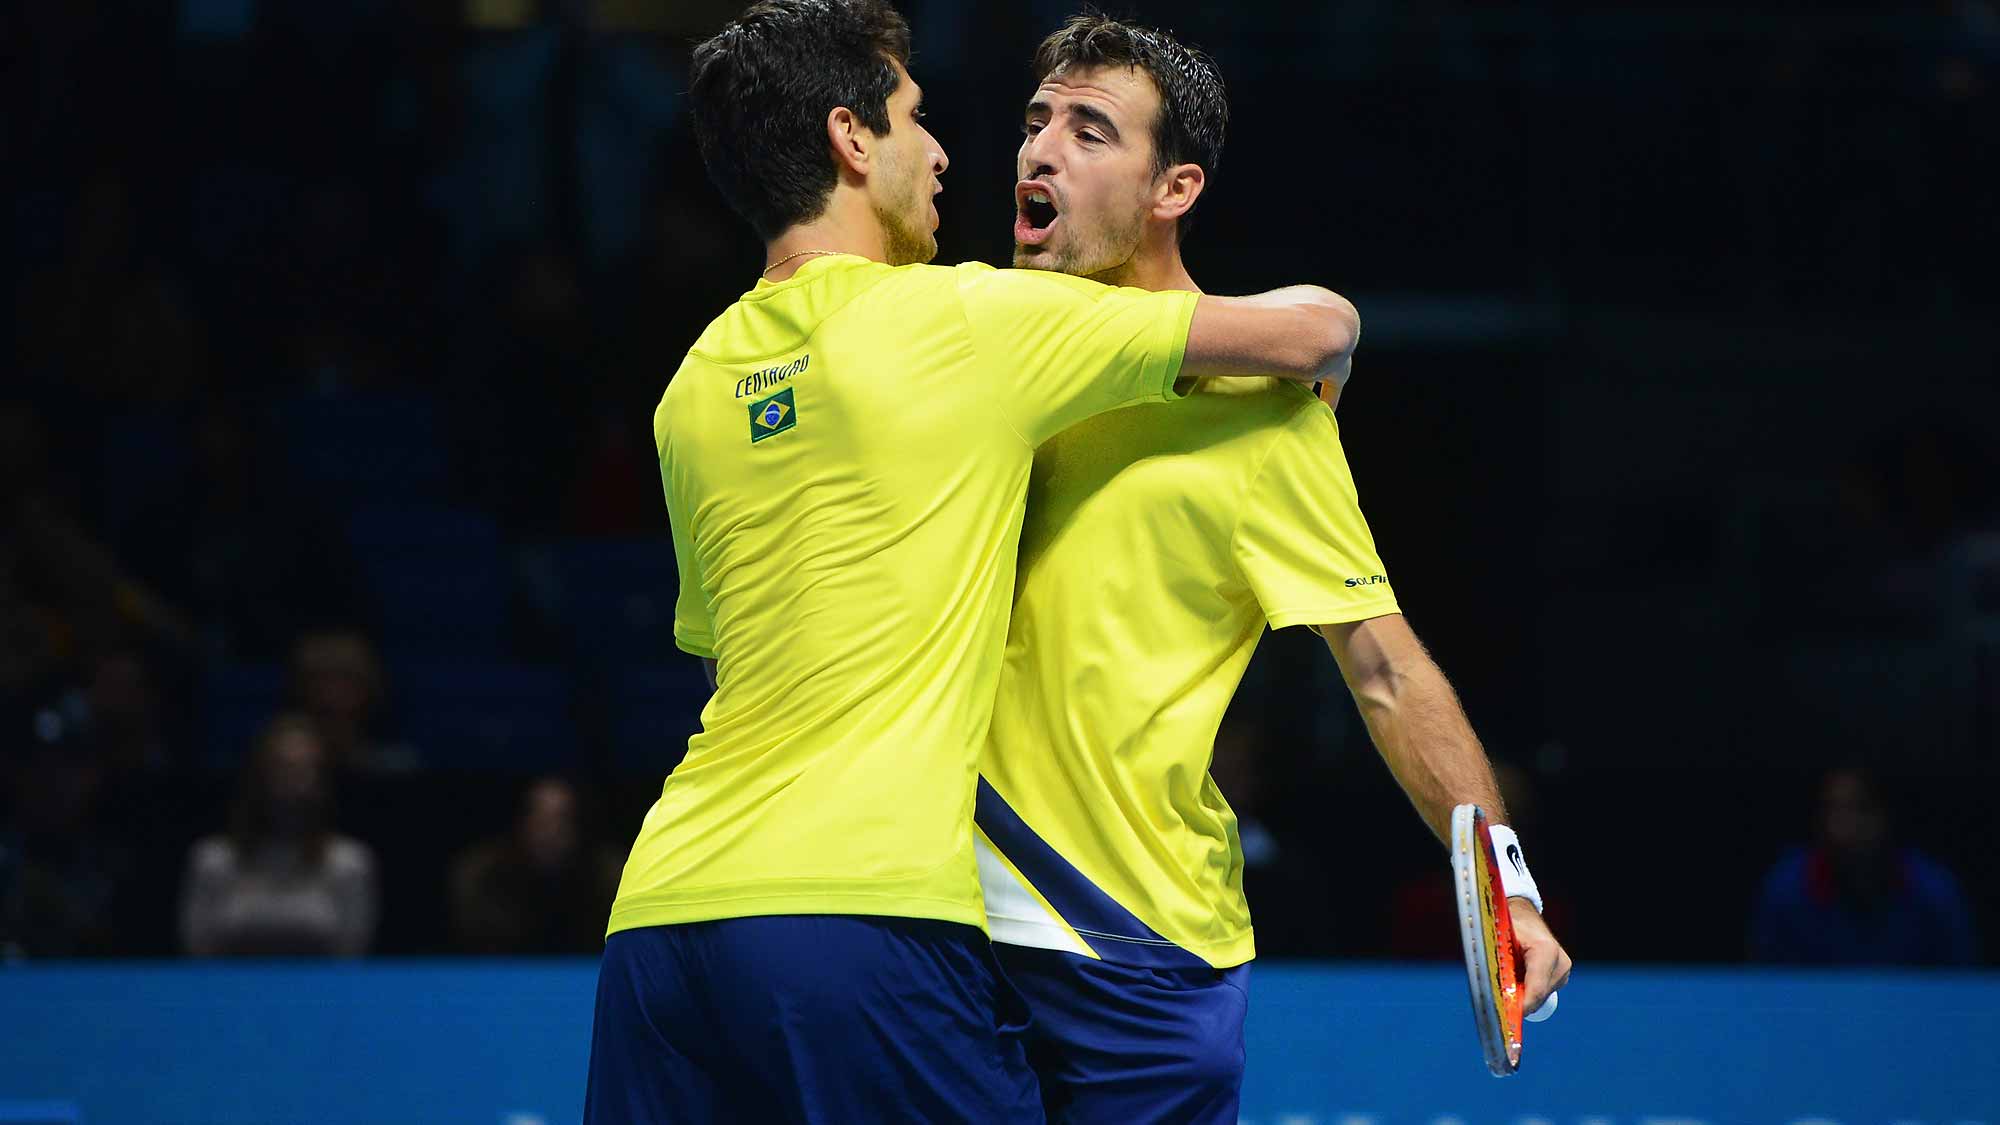 london-finale-2013-dodig-melo-tuesday